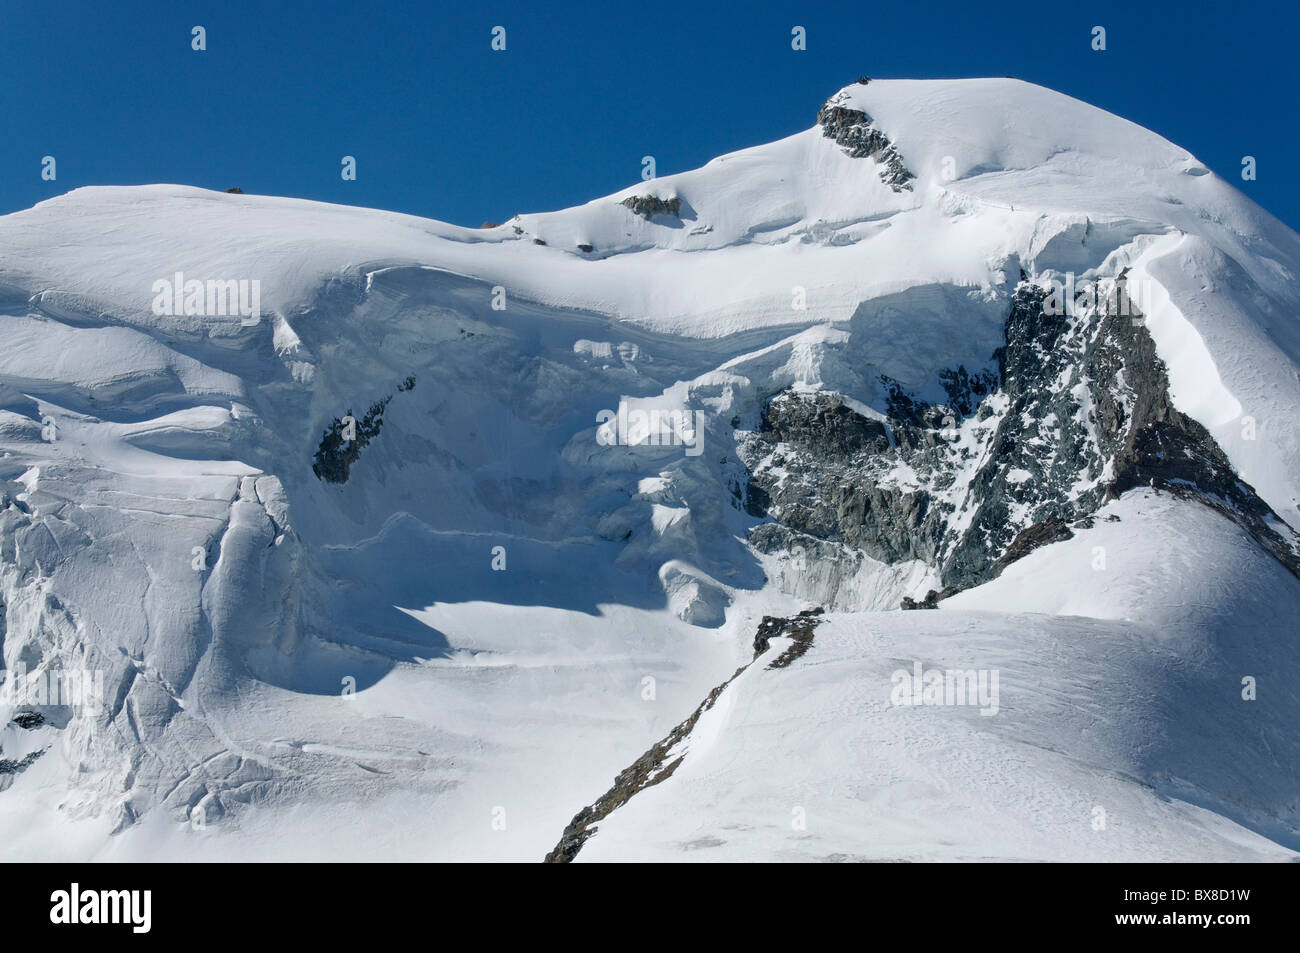 The North East side of the Allalinhorn, Saastal, Switzerland Stock Photo